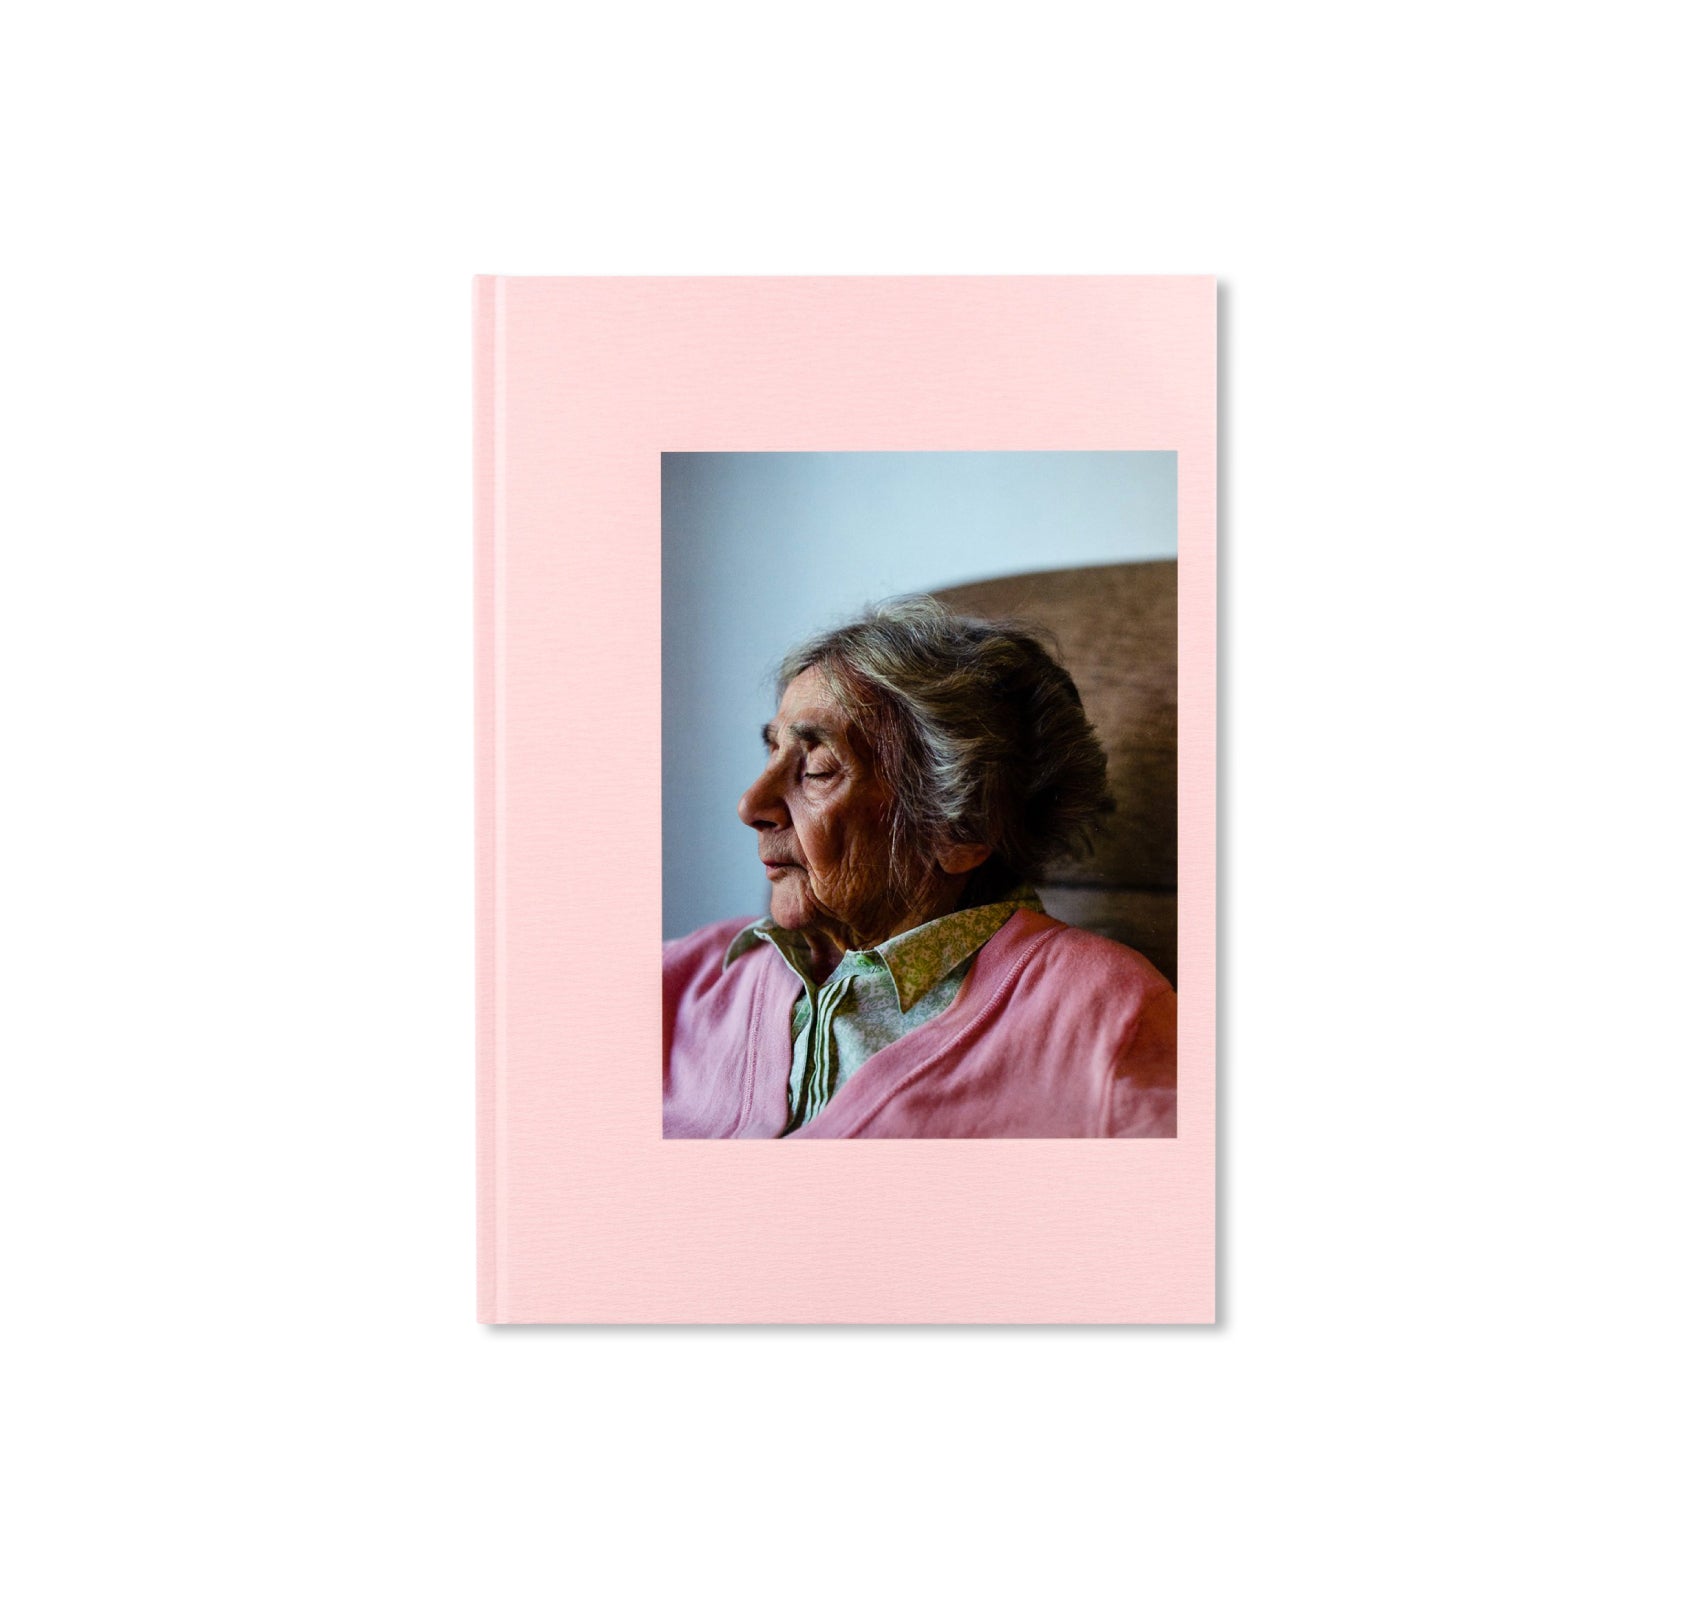 MOTHER by Paul Graham [SIGNED]